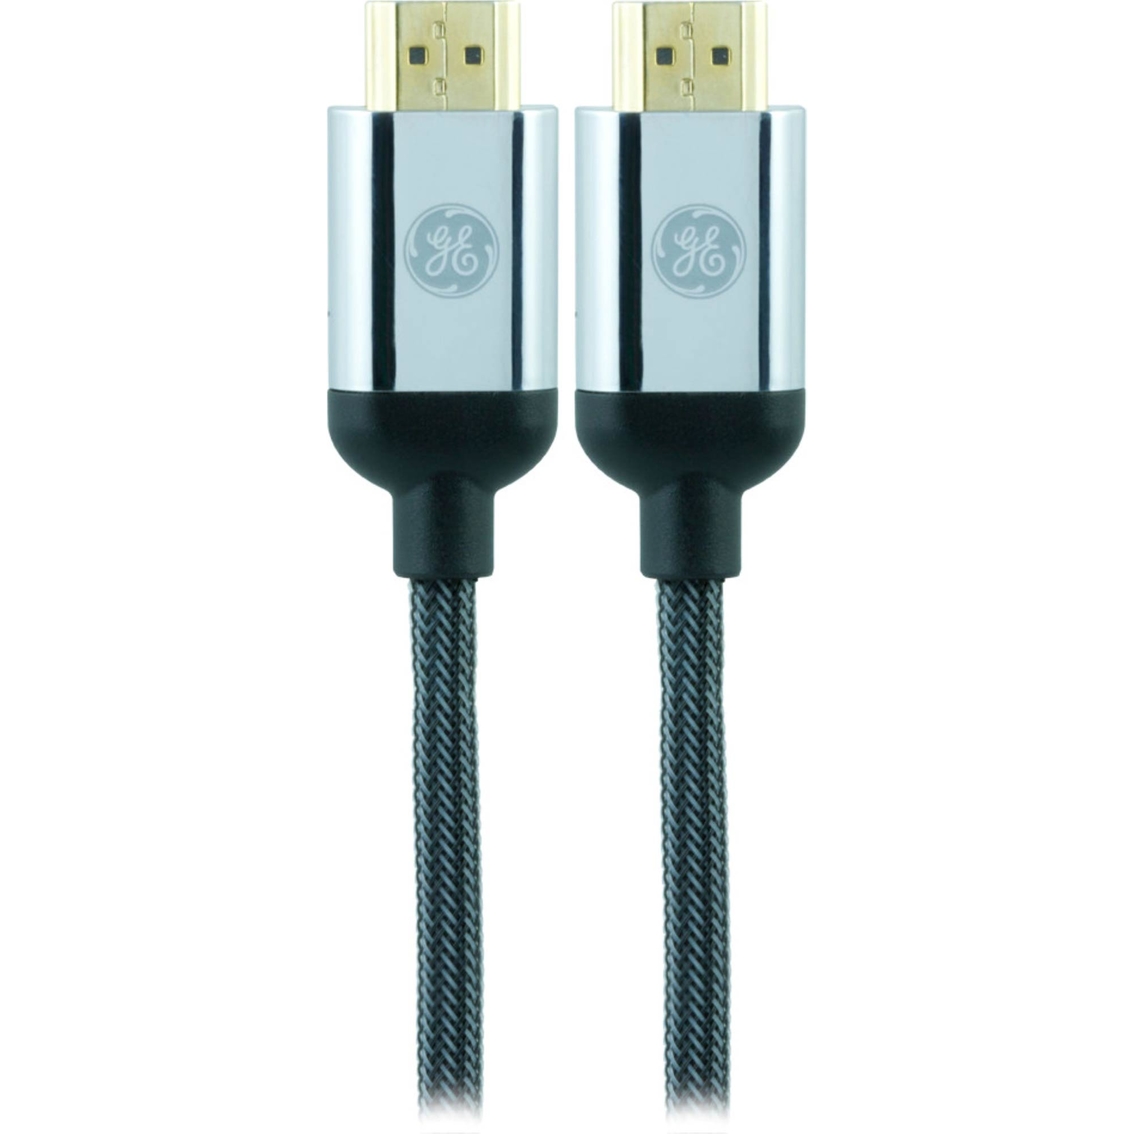 GE UltraPro Premium Braided HDMI 4K Cable 6 ft. - Image 3 of 4